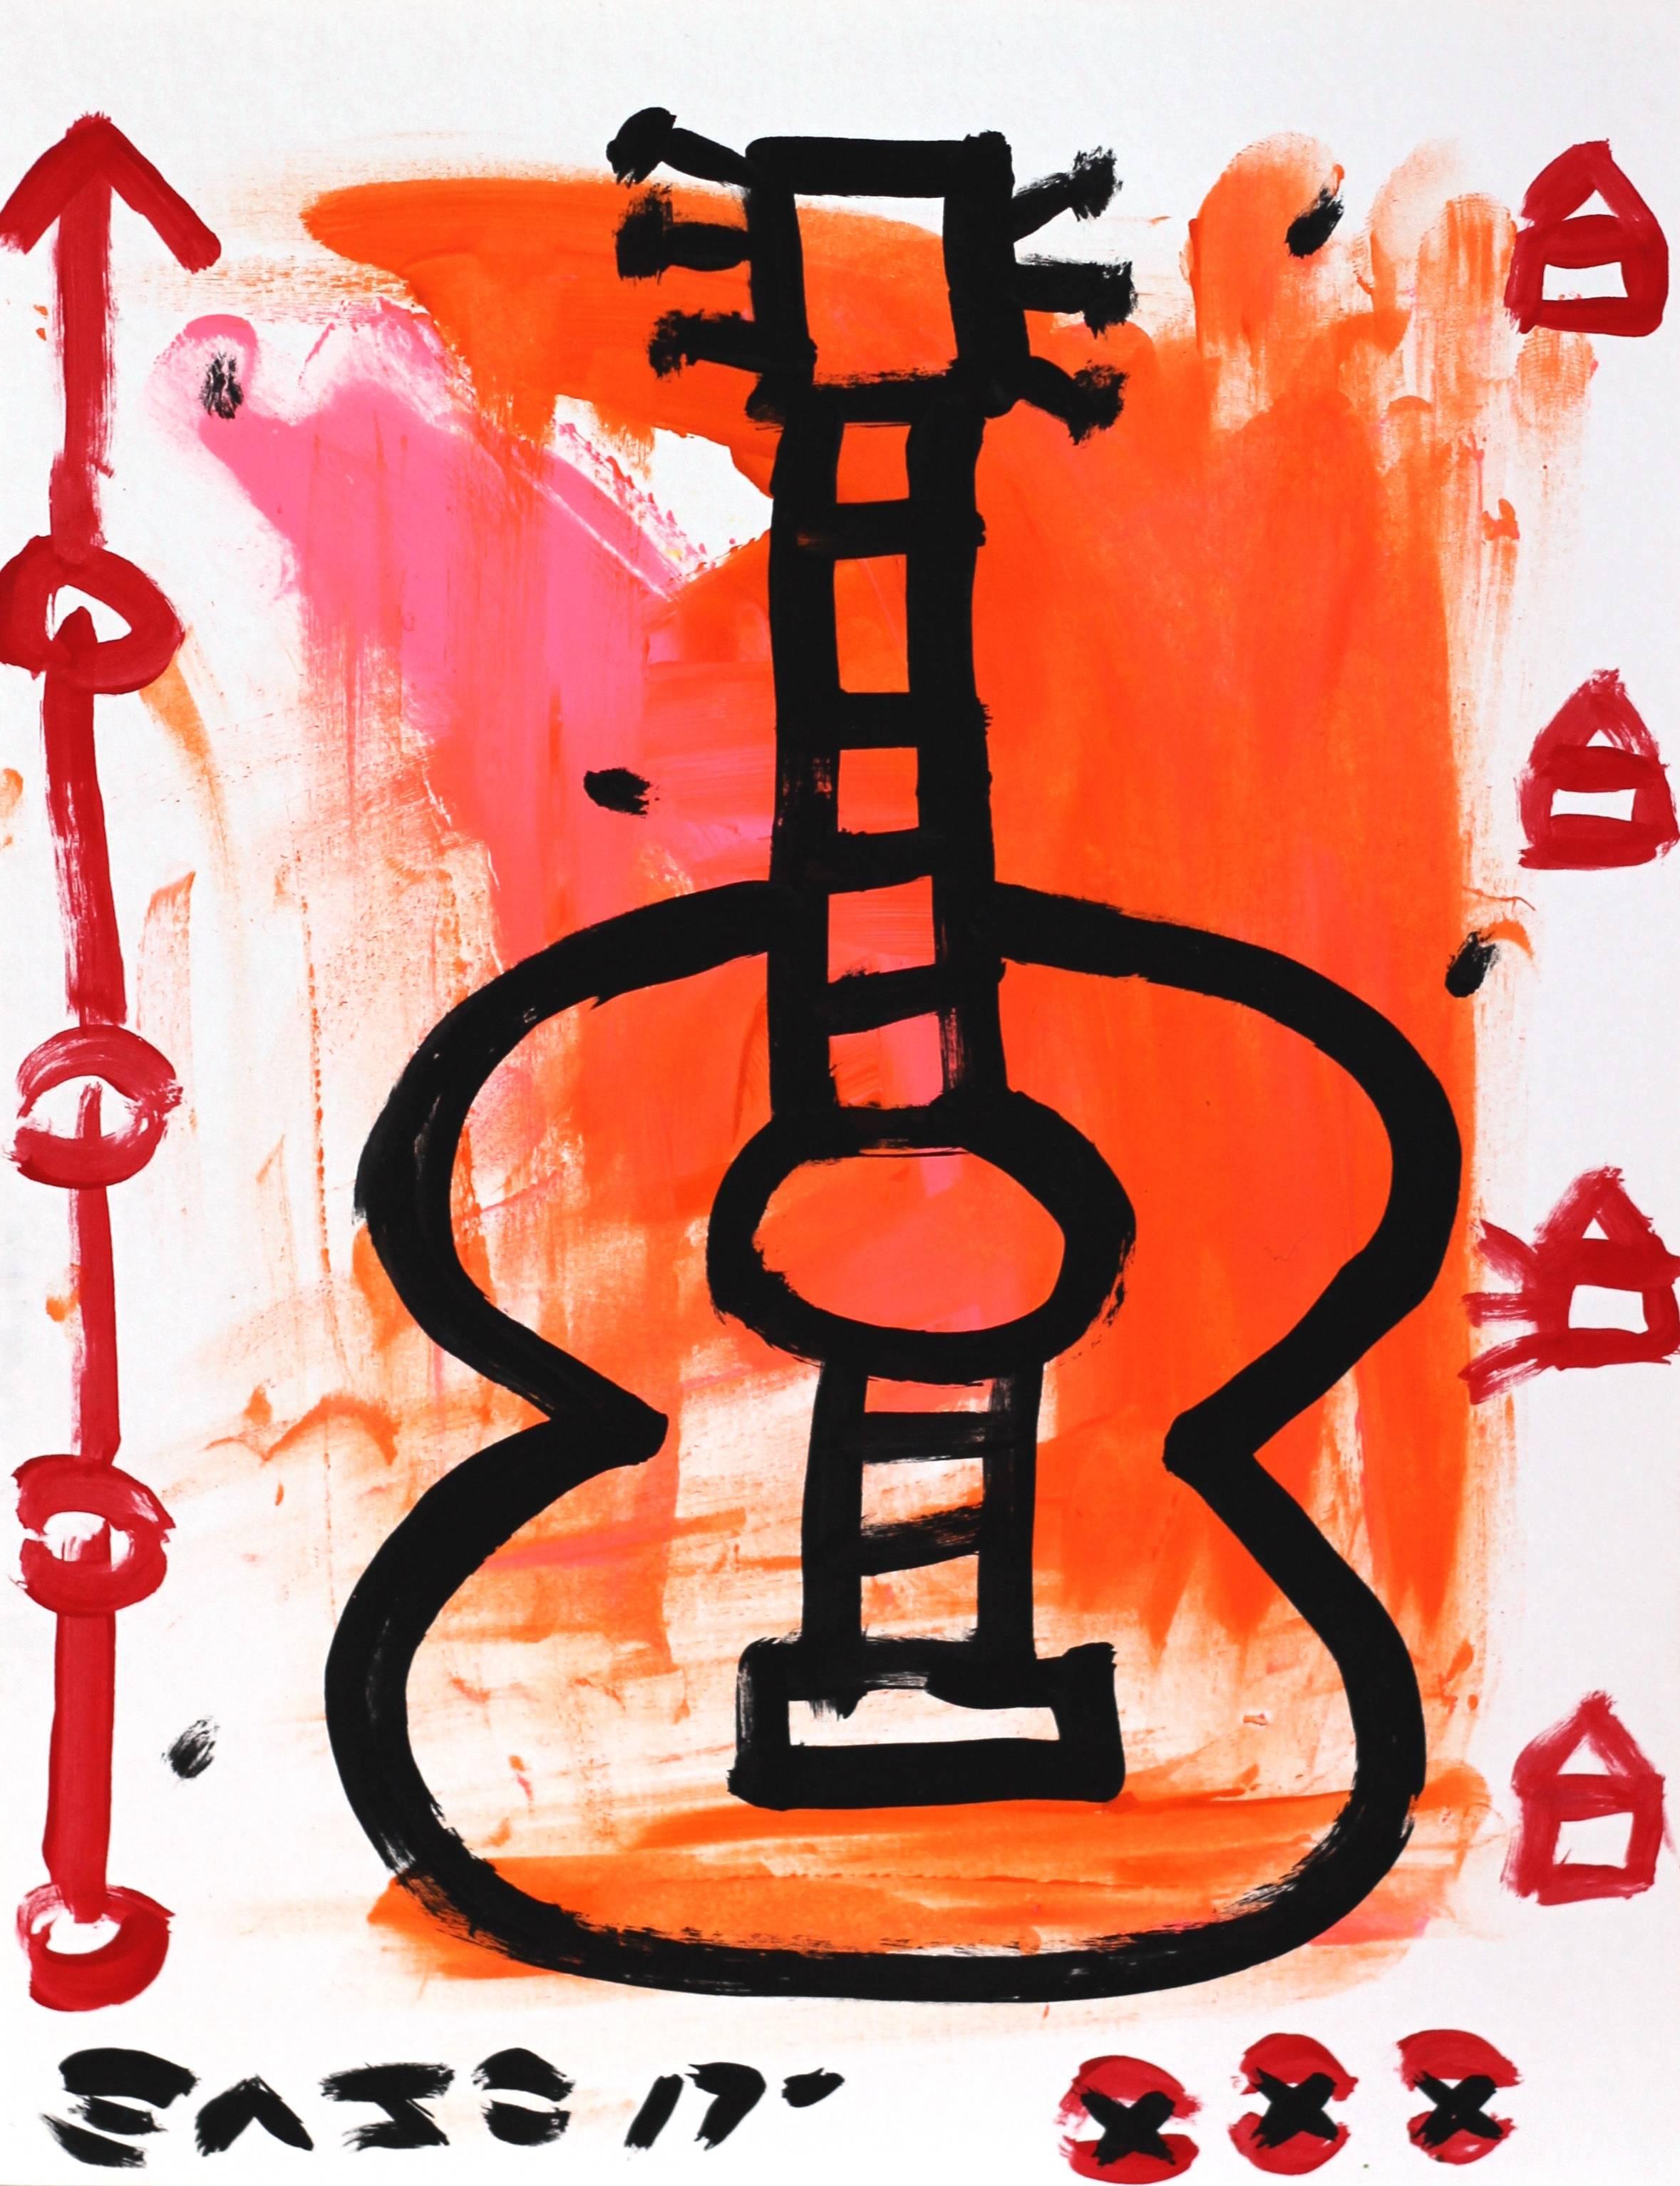 Gary John - "Open Chord Melody" - Original Colorful Guitar Street Art by  Gary John For Sale at 1stDibs | melody ege, melody aaf, painted yellow  lines chords